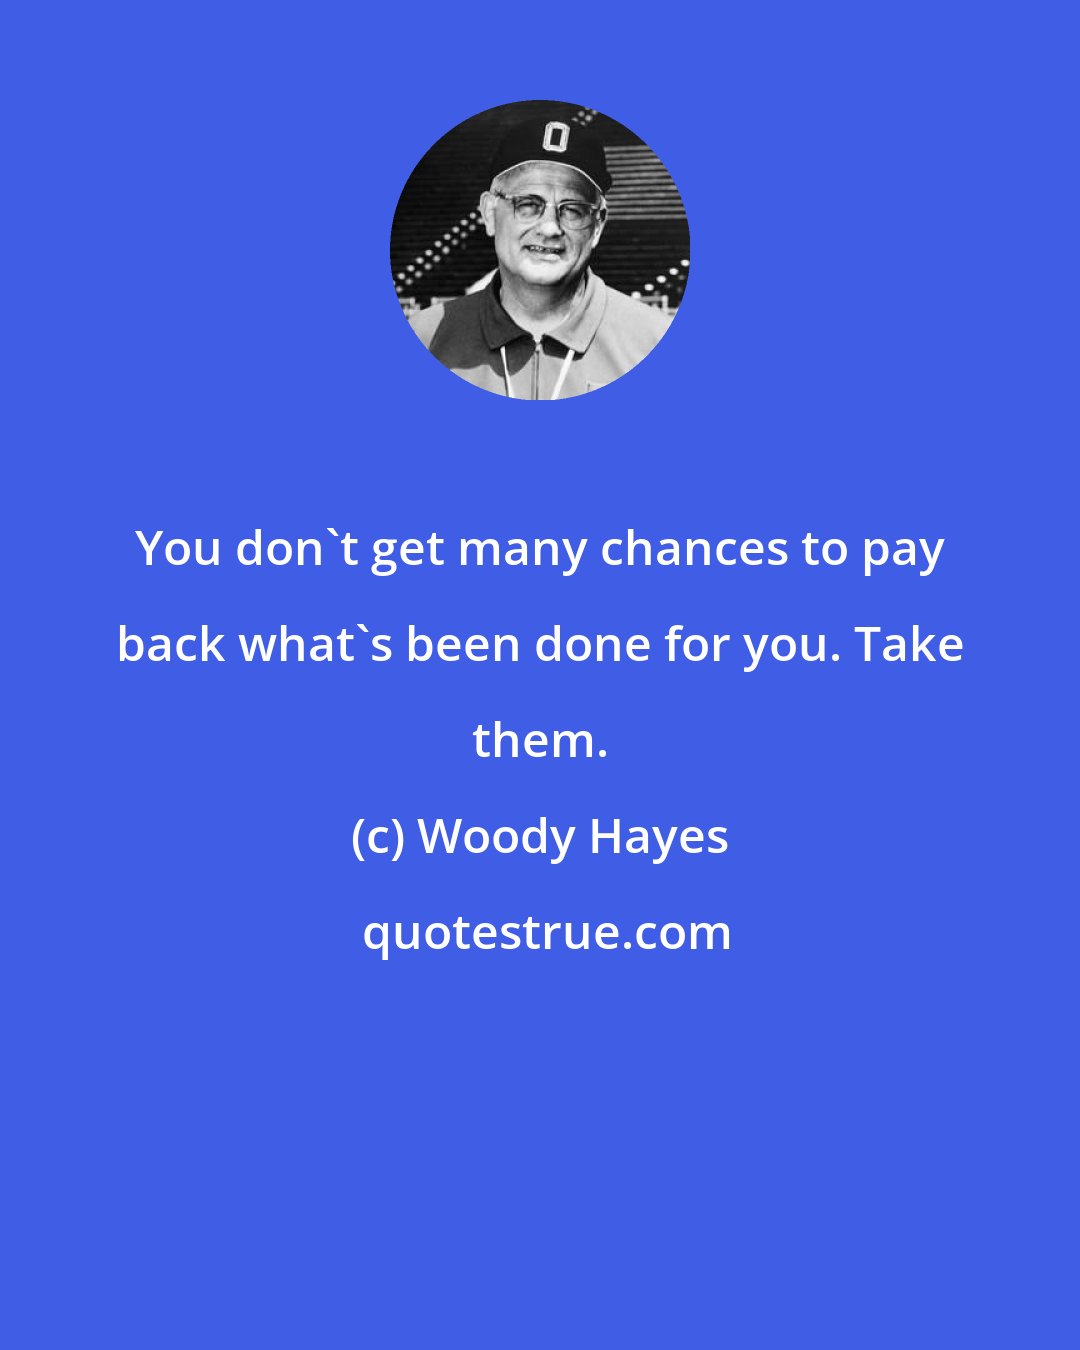 Woody Hayes: You don't get many chances to pay back what's been done for you. Take them.